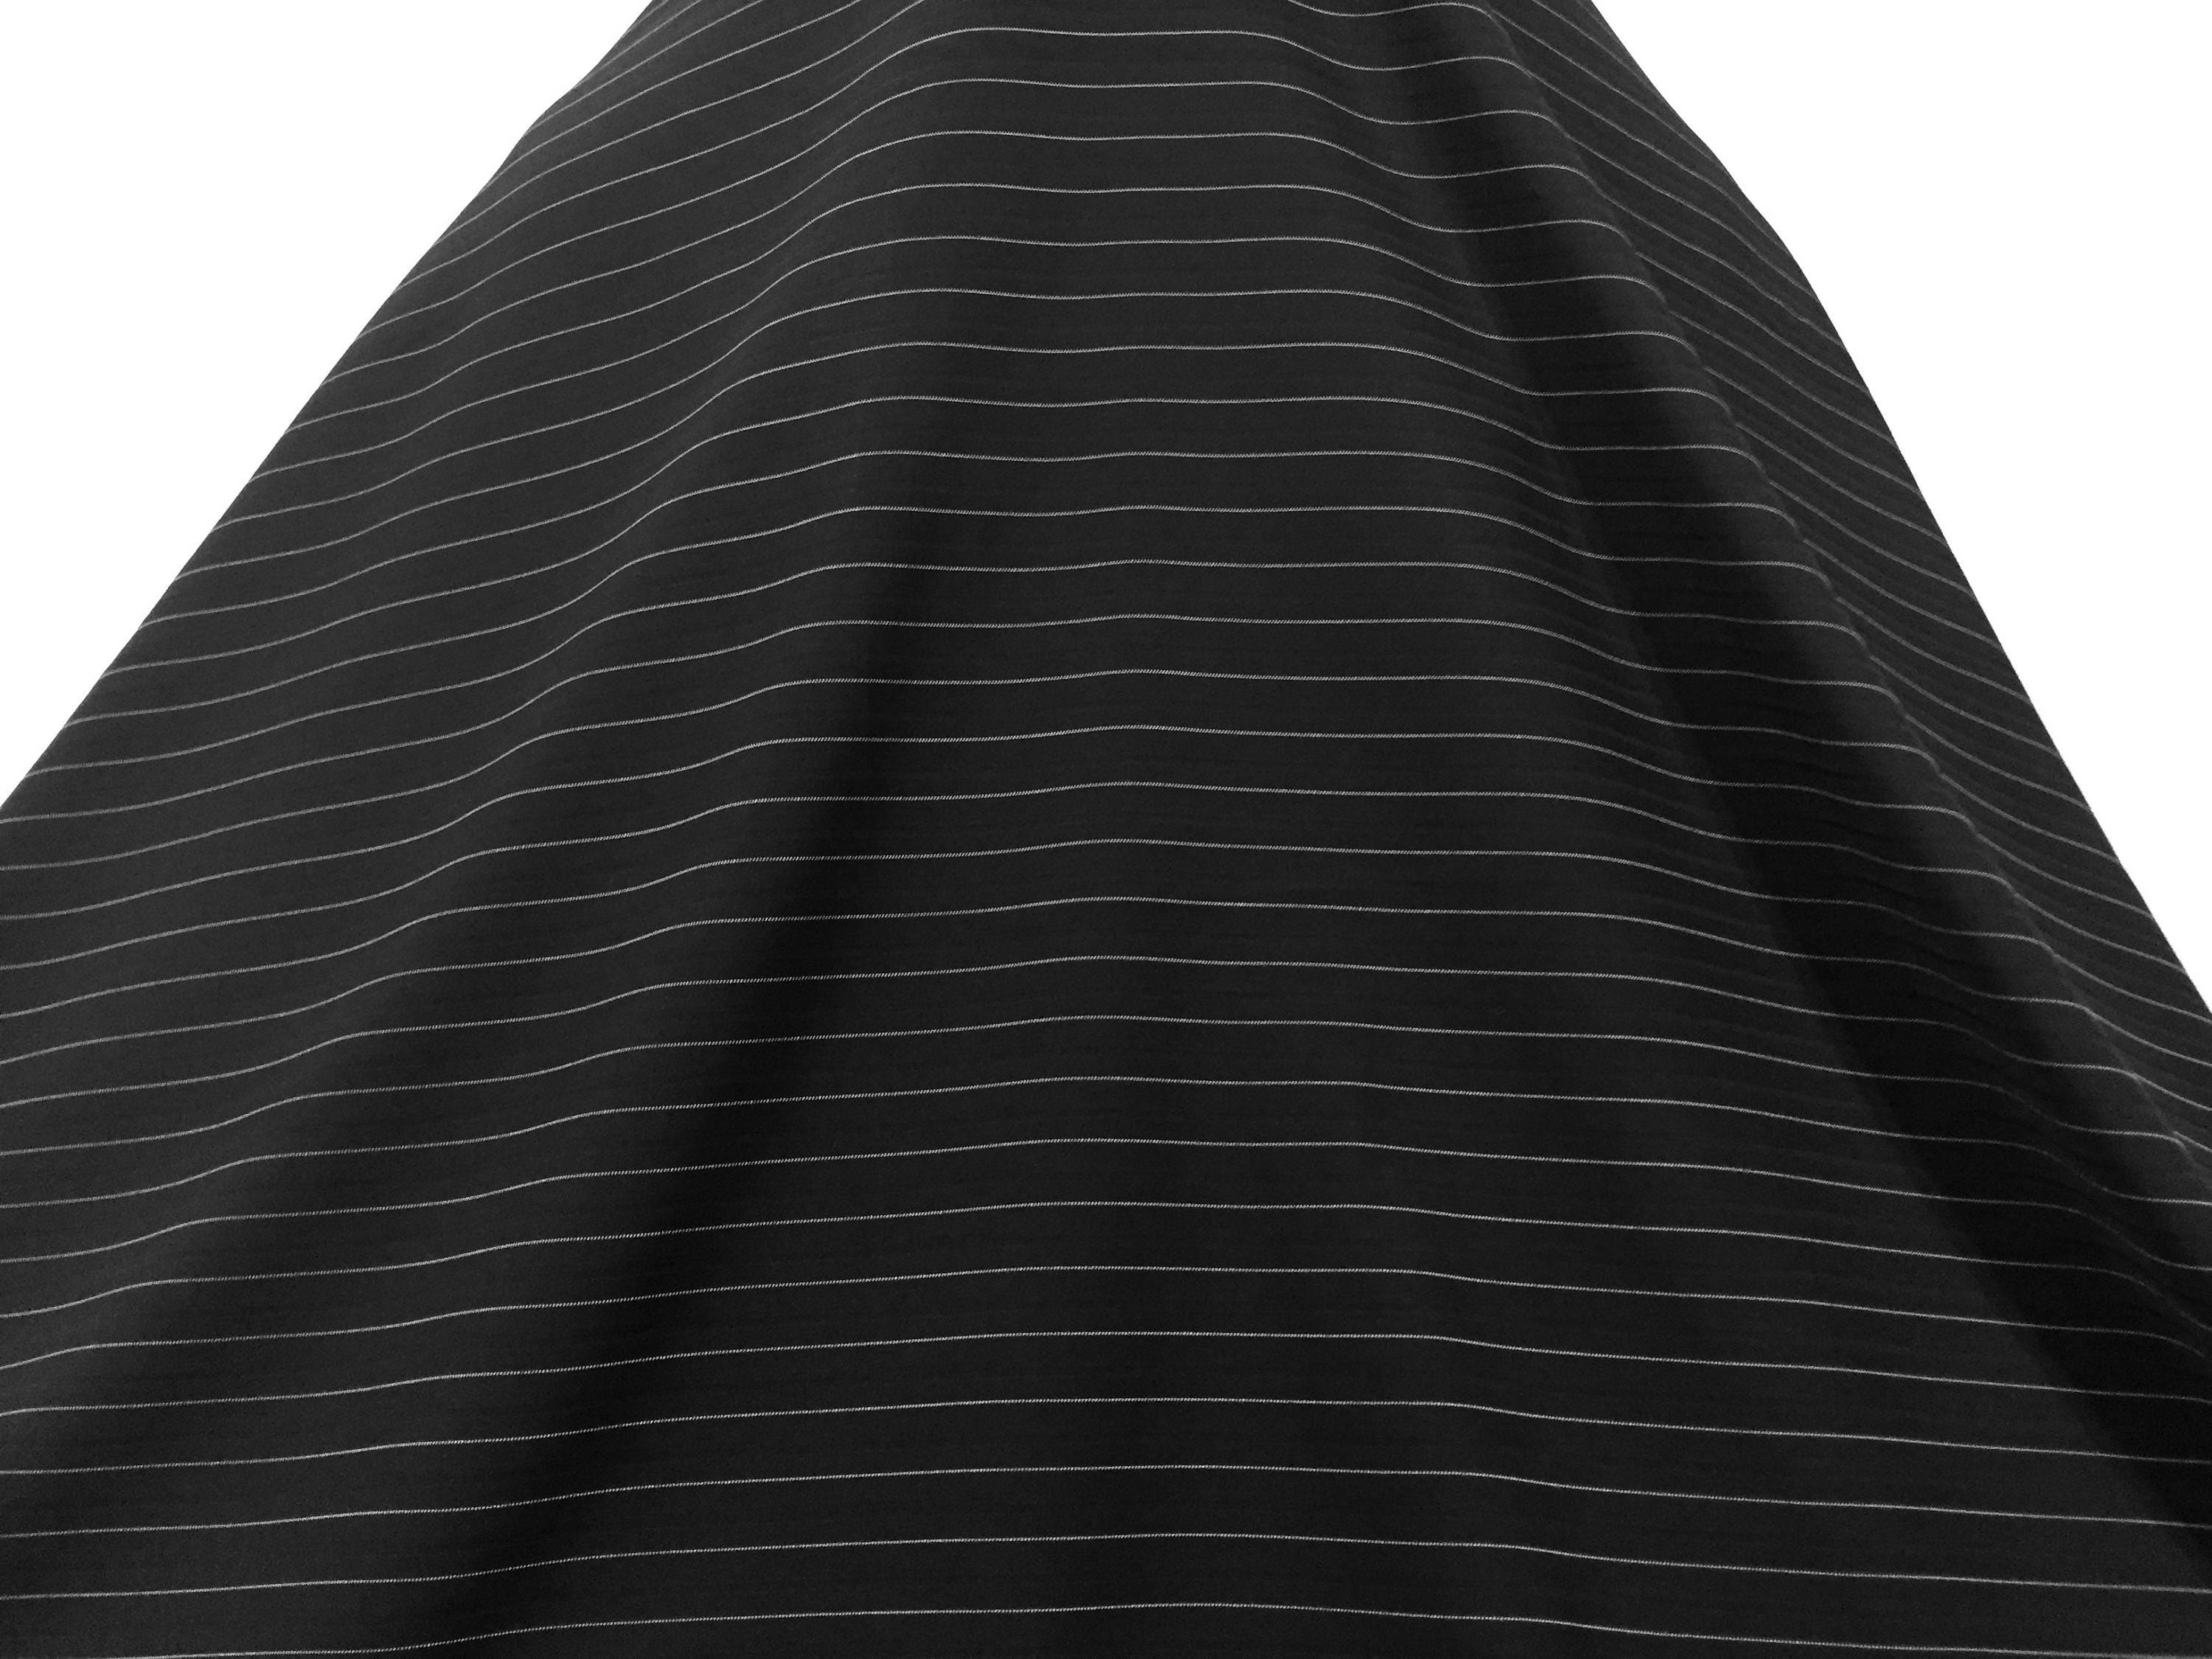 Striped Black and Beige Gabardine, Black and Beige Stripes, Striped Fabric,  Remnant Material, Fabric, Dress Fabric, Black and Beige Material 